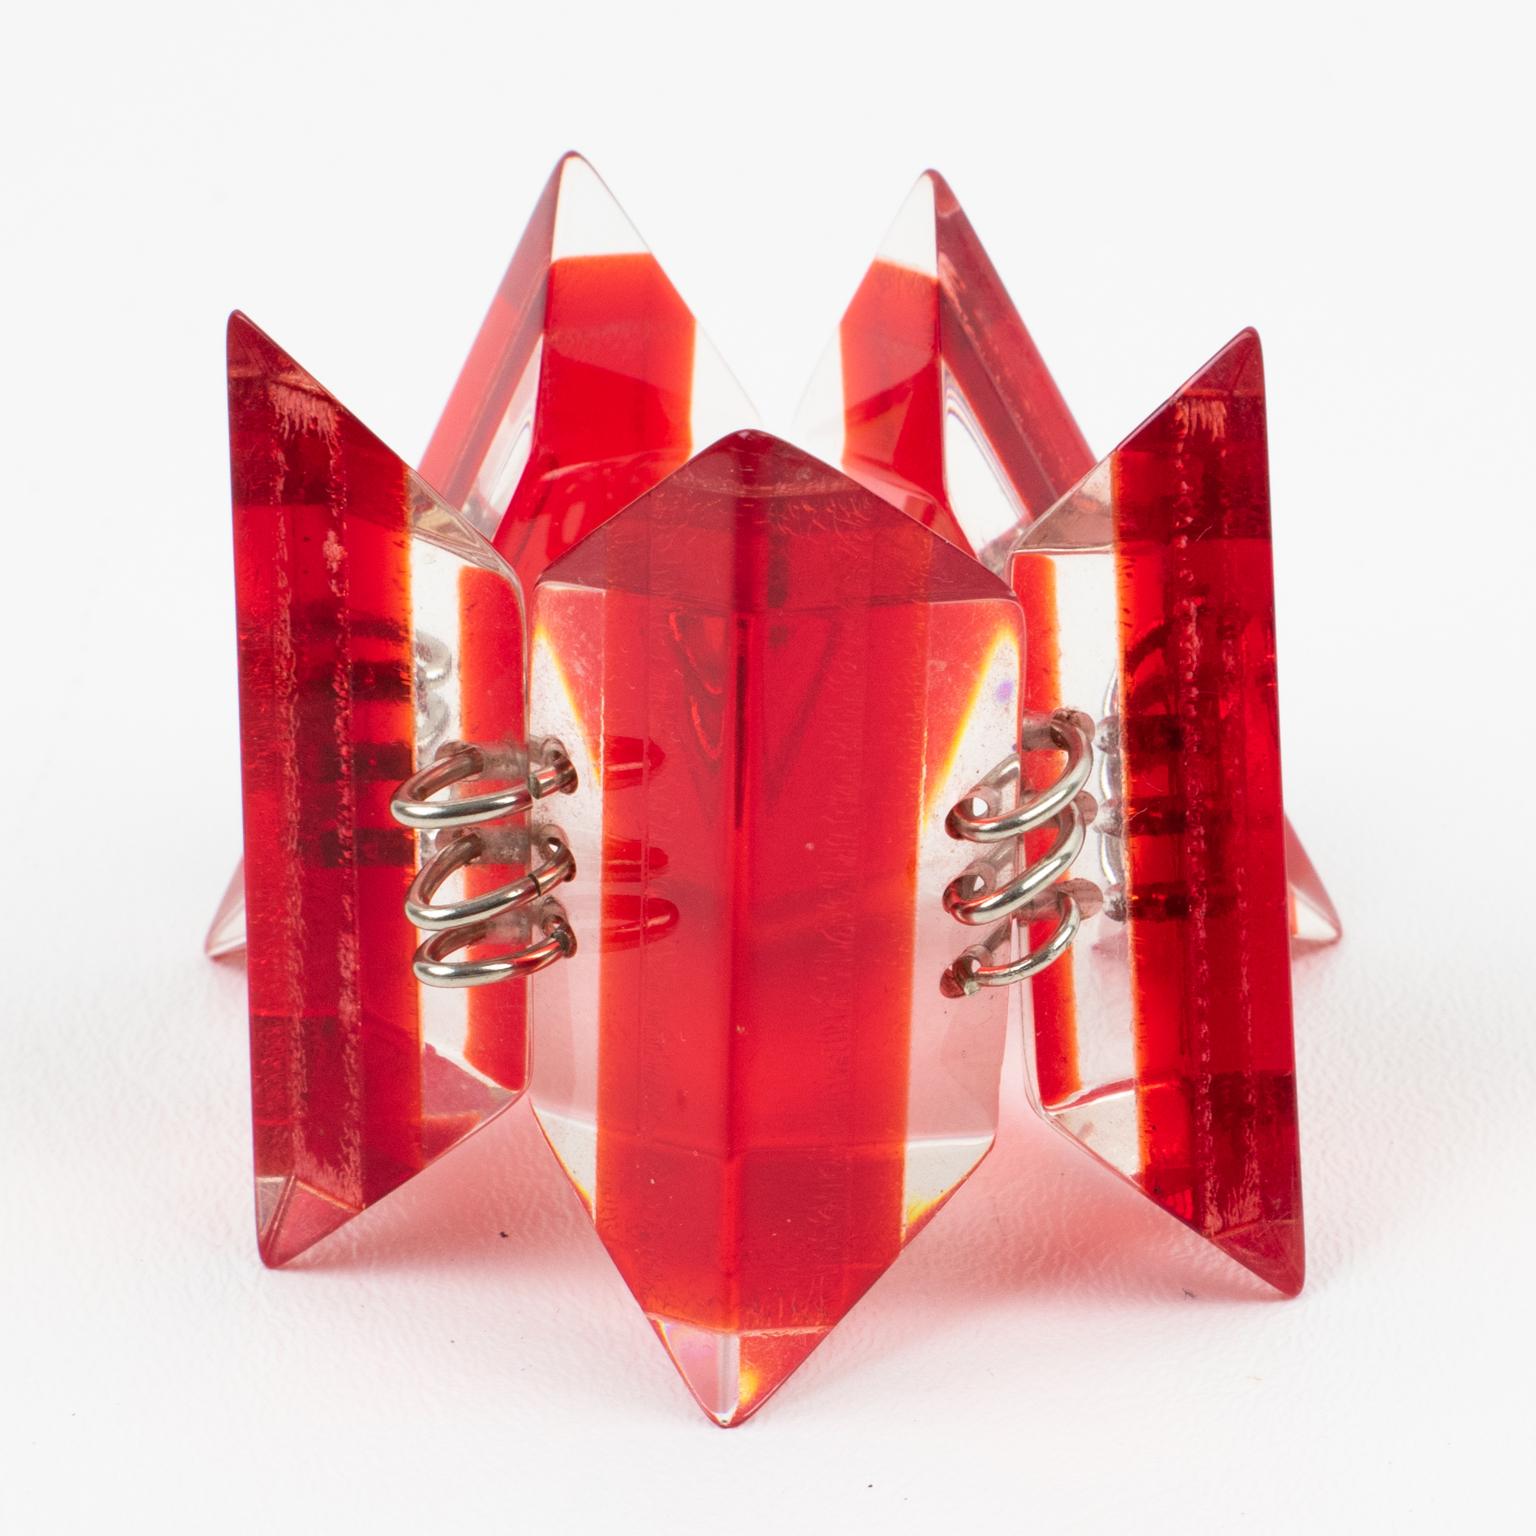 This attractive massive Lucite link bracelet boasts a geometric ice cube shape in laminated transparent and bright red colors with silvered metal hardware. There is no visible maker's mark.
The bracelet is in good condition, with no chips or cracks.